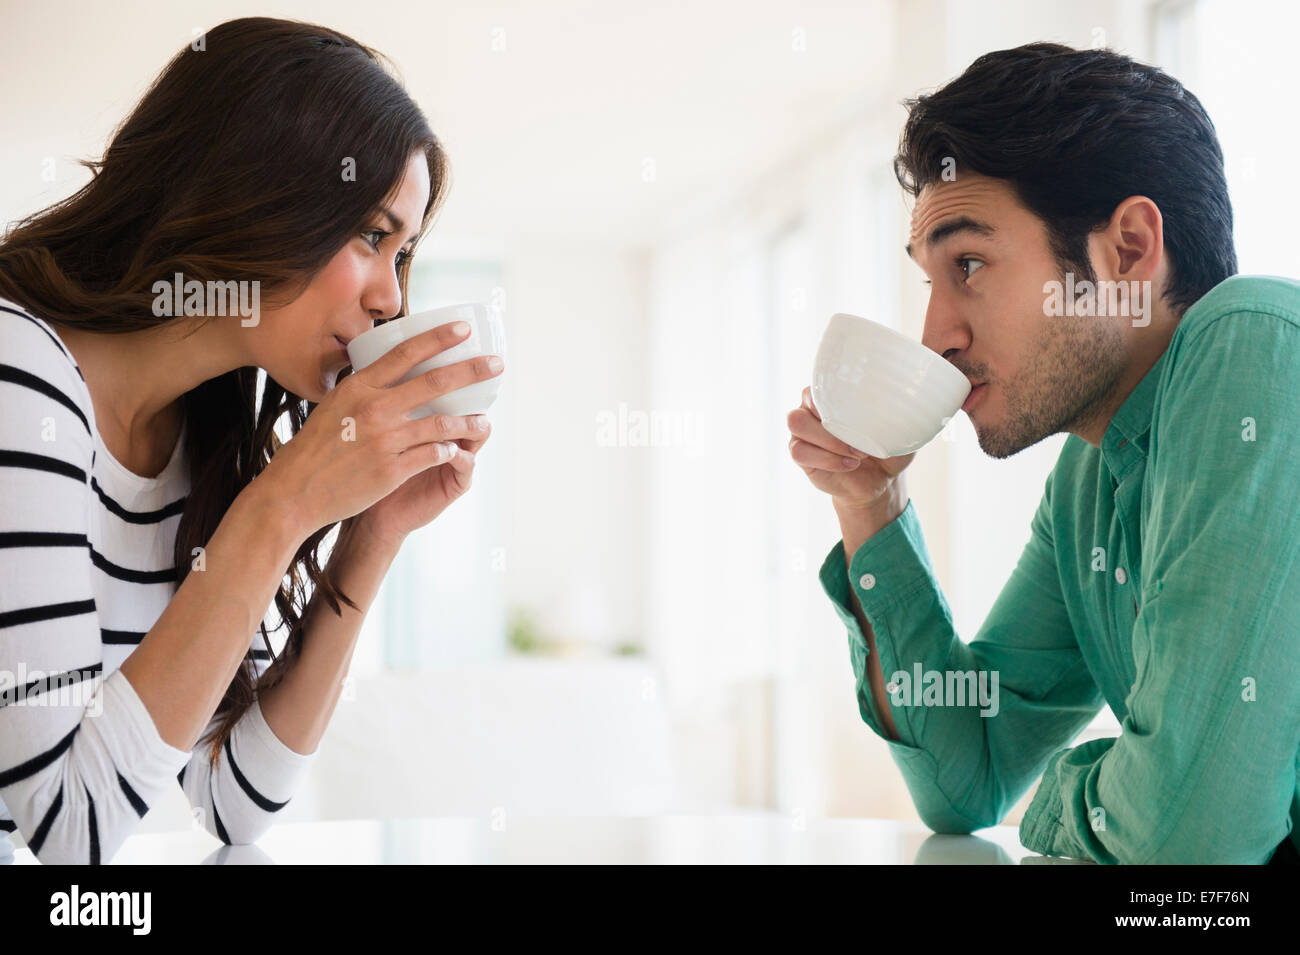 Couple drinking coffee together Banque D'Images